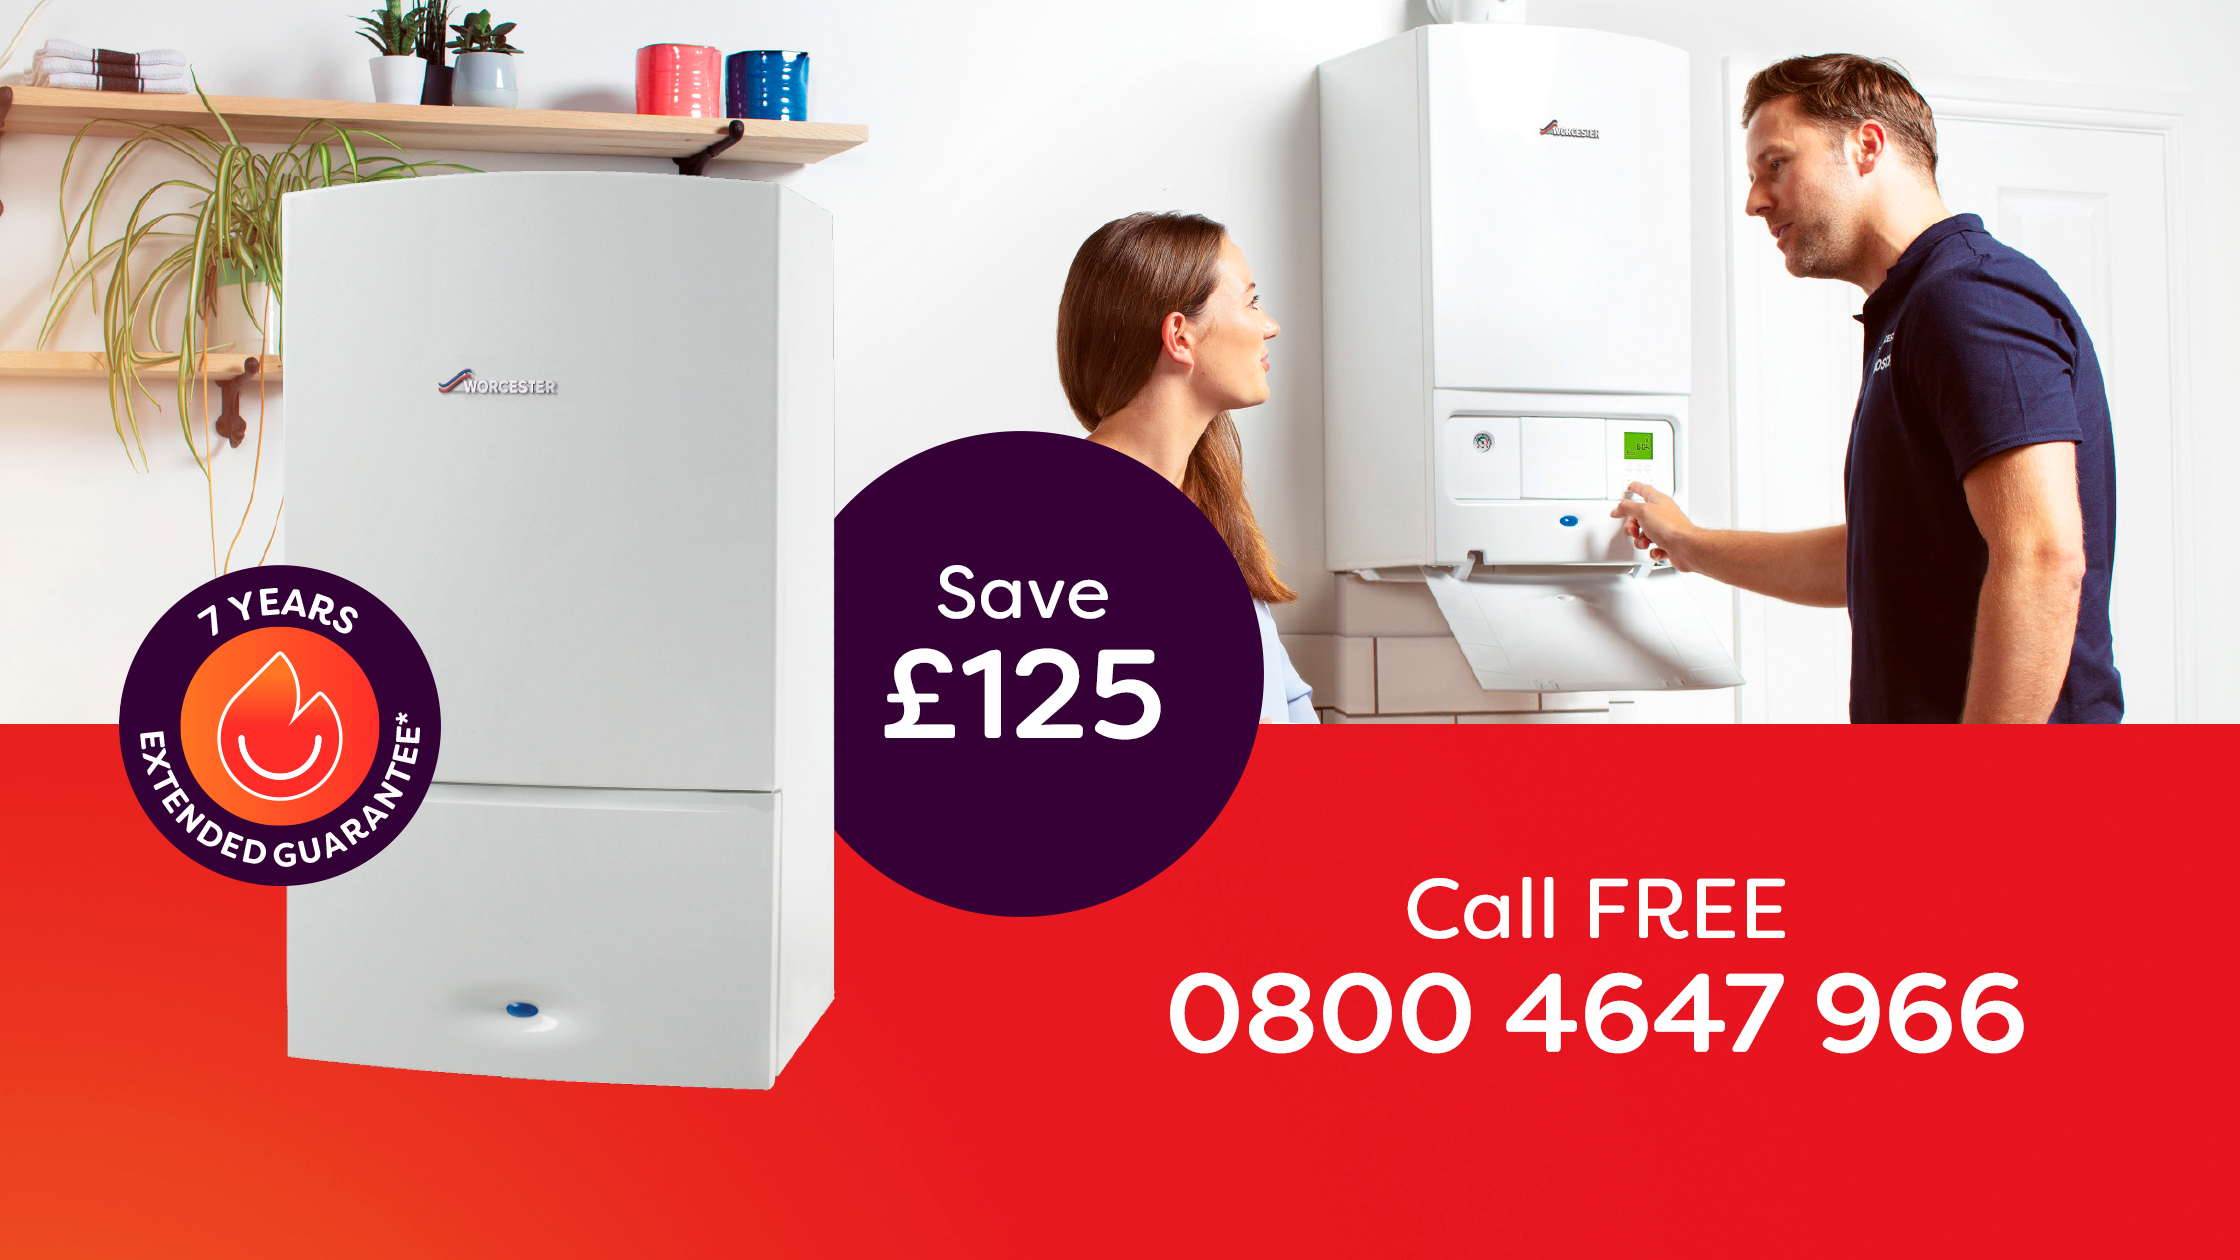 Our Bestselling boiler is on sale!